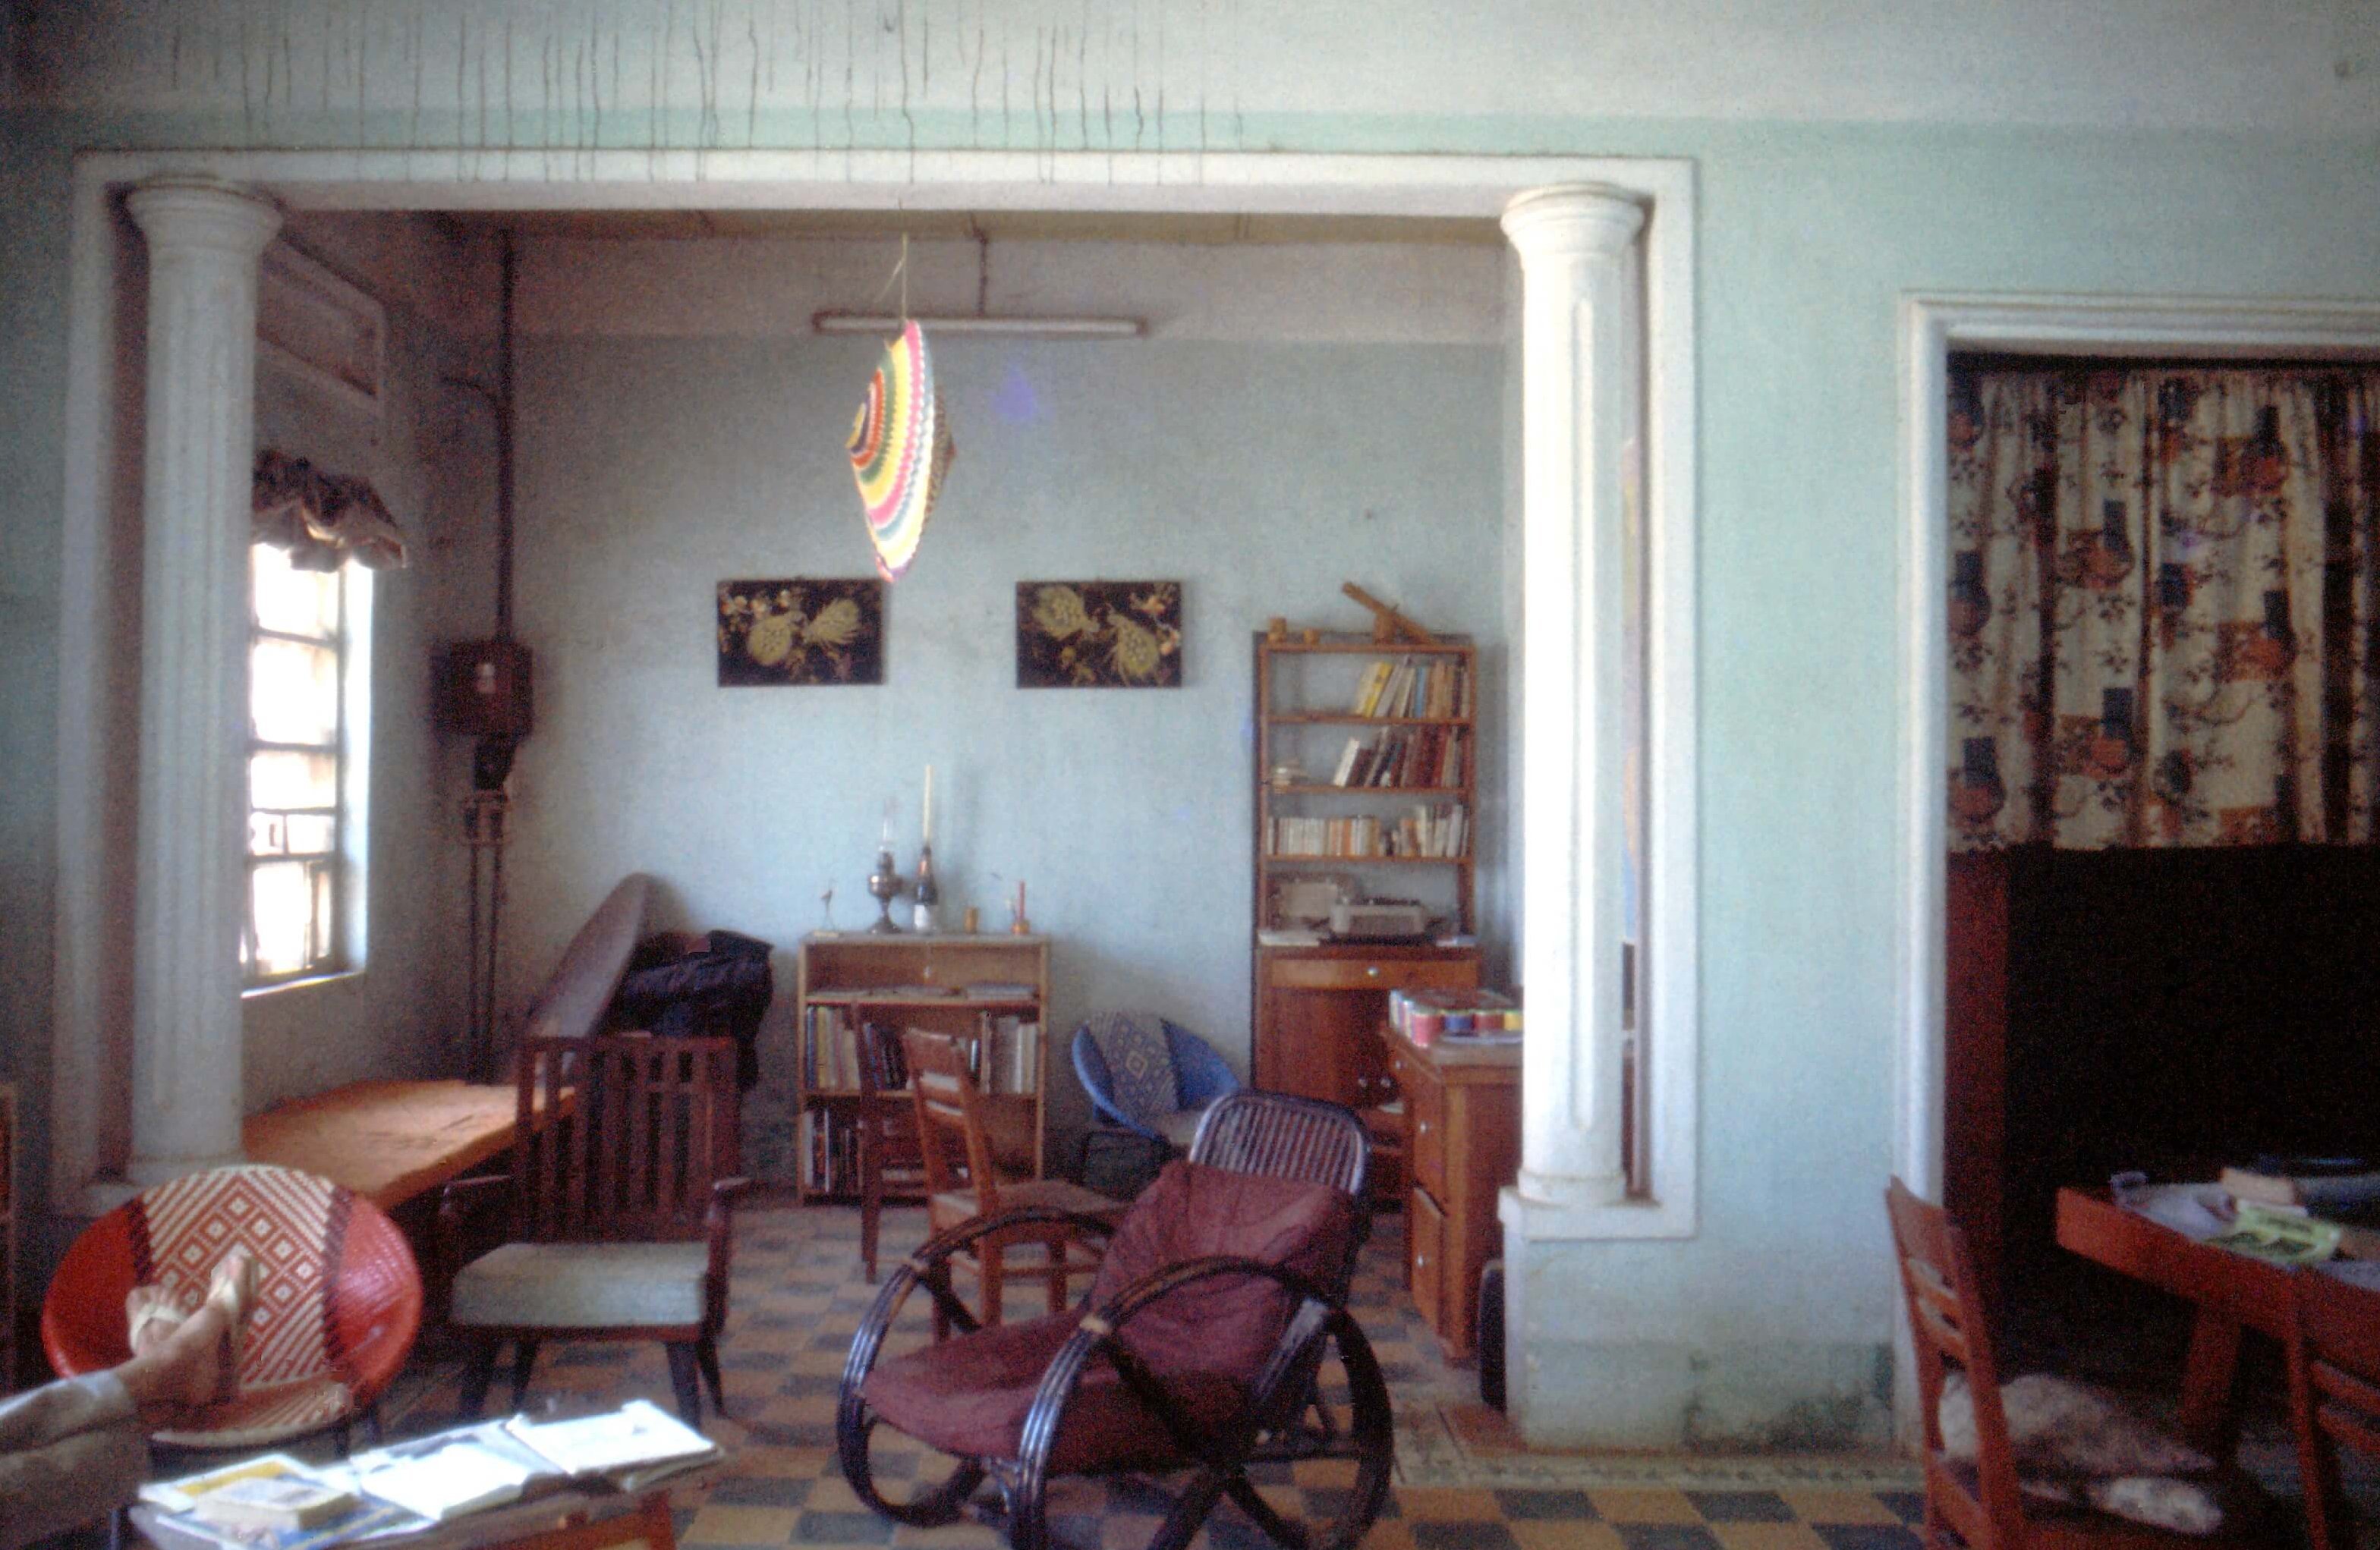 Living room of a house with a lot of natural light. Two crossed feet in flip-flops are poking out in the lower left corner.